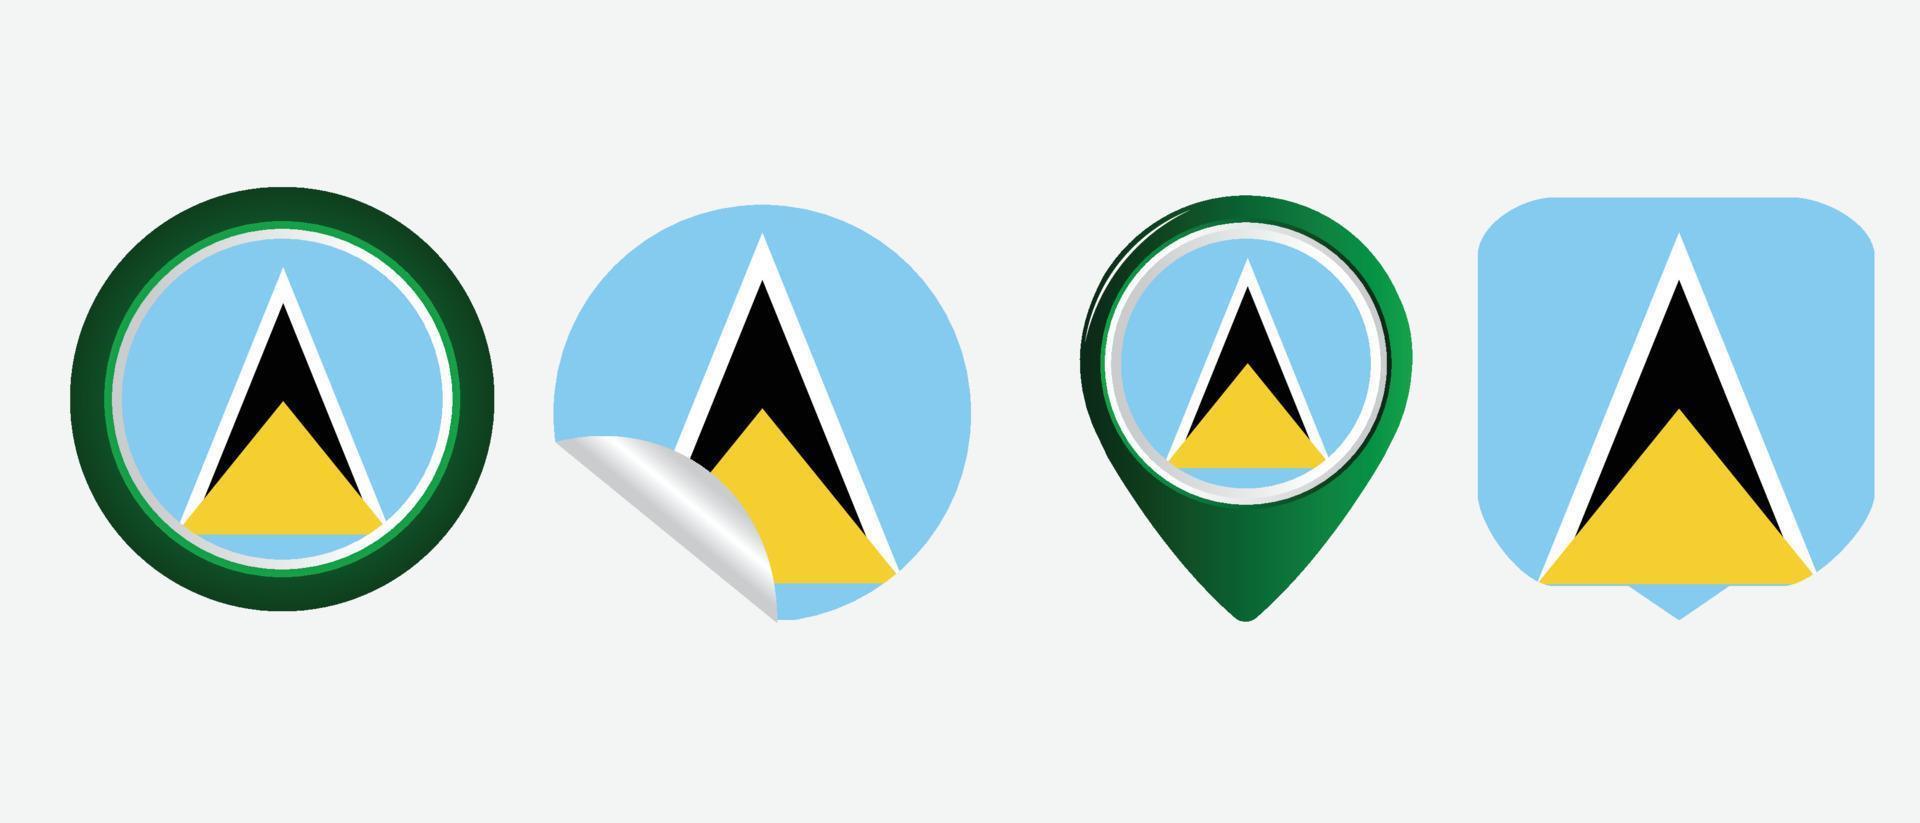 Saint Lucia flag icon . web icon set . icons collection flat. Simple vector illustration.